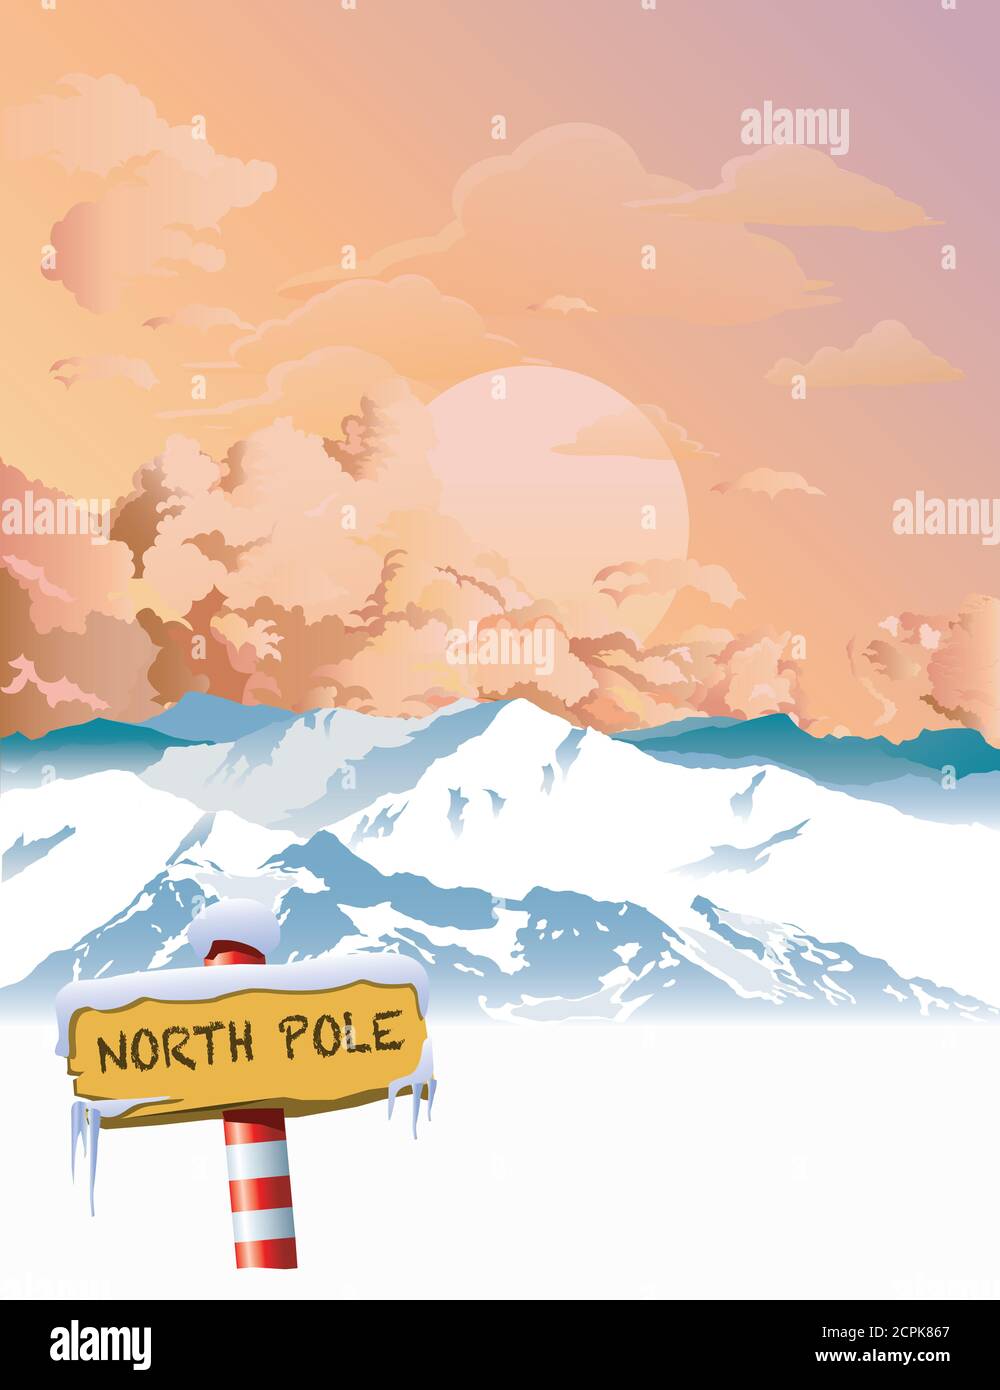 North Pole sign with glacier and mountain range background set against a dawn or dusk sky Stock Photo